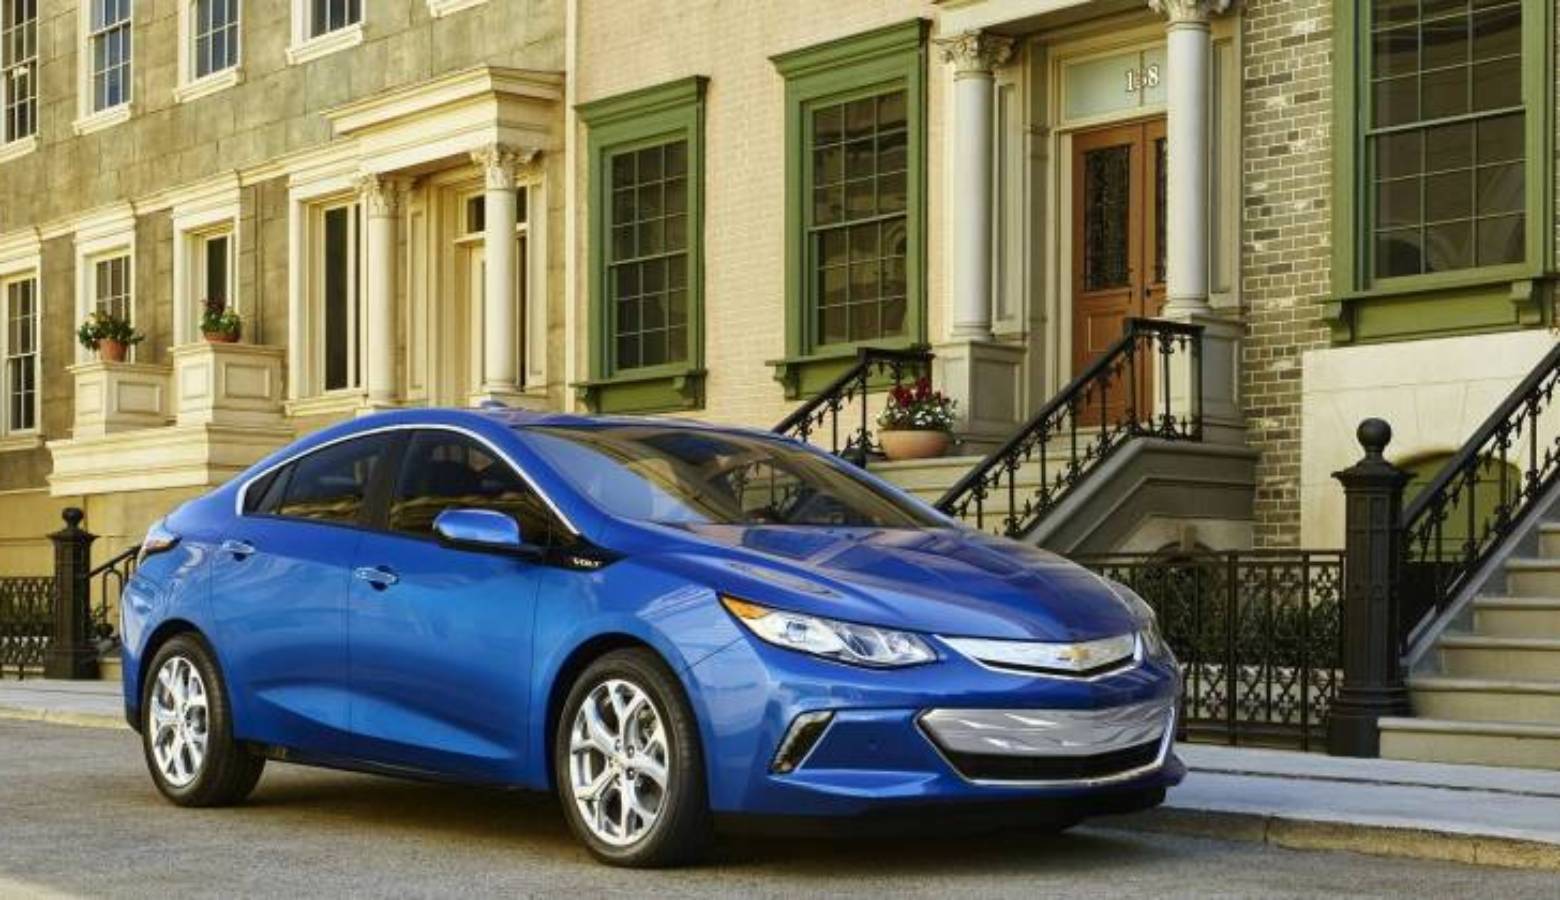 The company said it plans to halt production of the Chevrolet Cruze, Buick LaCrosse, Chevrolet Volt (pictured), Cadillac CT6 and Chevrolet Impala by the end of 2019. (Courtesy of Chevrolet)